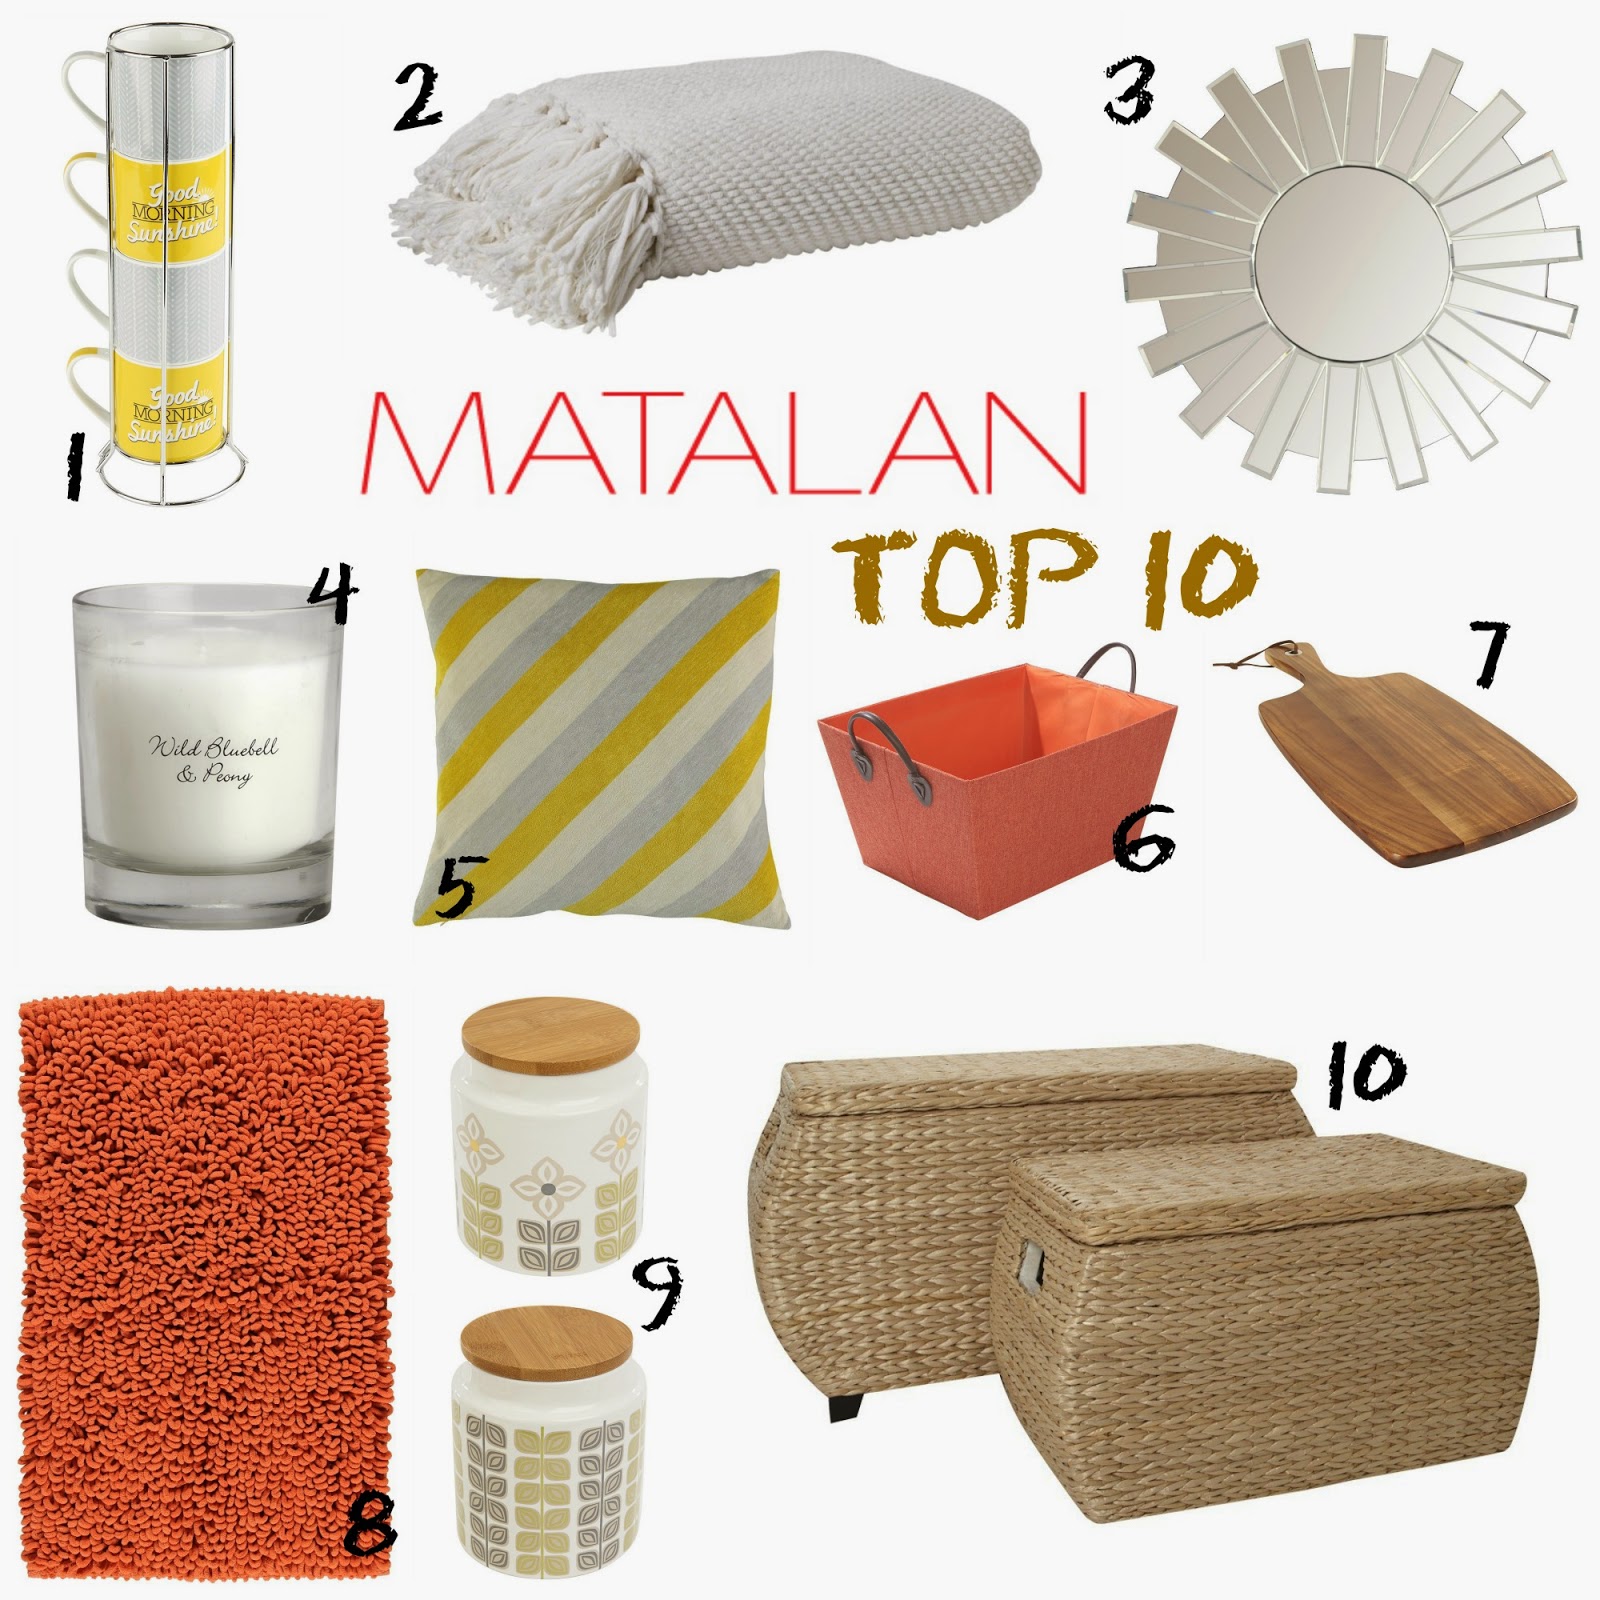  A few days in the country with #MATALANHOME | matalan | home collection | cotswolds | family holiday | days away | matalan home | mission PR | matalan home | spring collection | home buys | #matalanhome | country cottage | cottage | cottage holiday | bedlinen | throws | cushions | bath mats | playroom | kitchen utensils | chopping boards | cheap home ware | designer home buy lookalikes | mamasVIB | bonita turner 